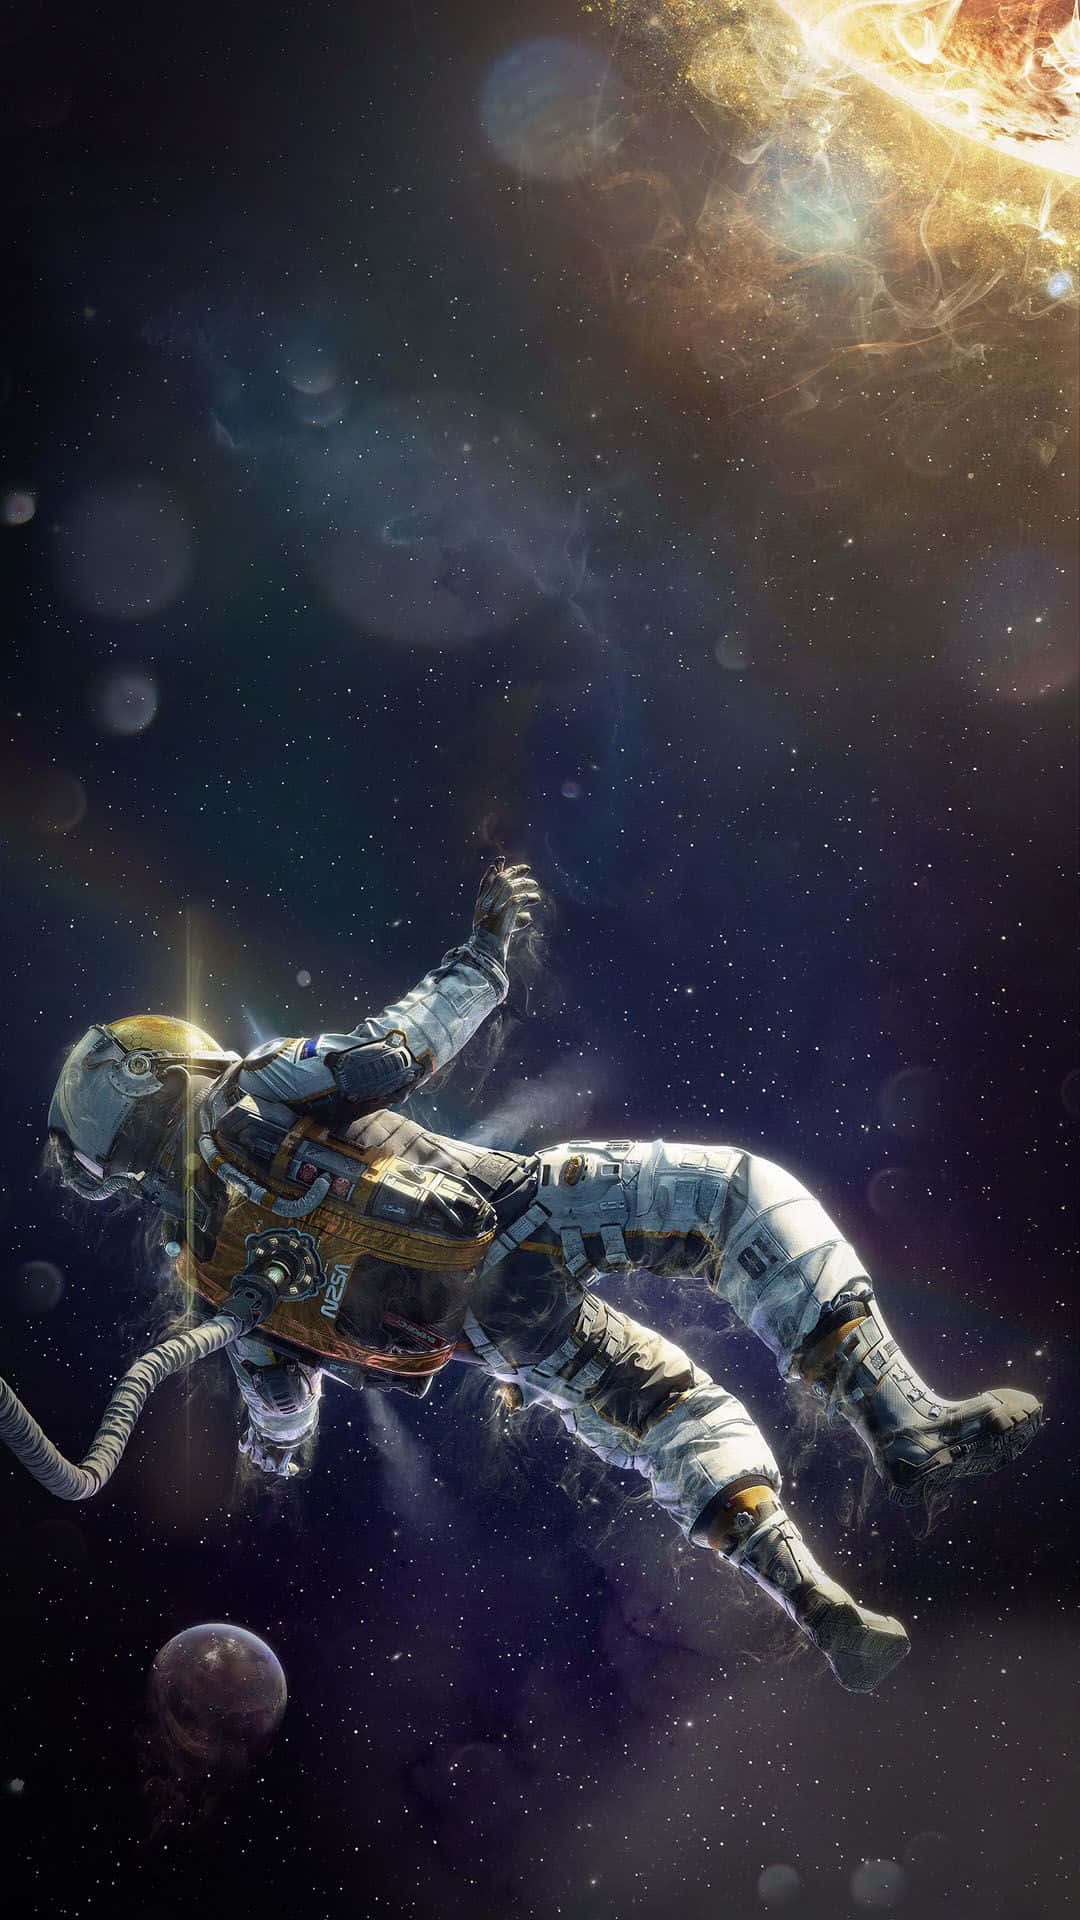 "See yourself in a whole new light with this Astronaut iPhone wallpaper." Wallpaper